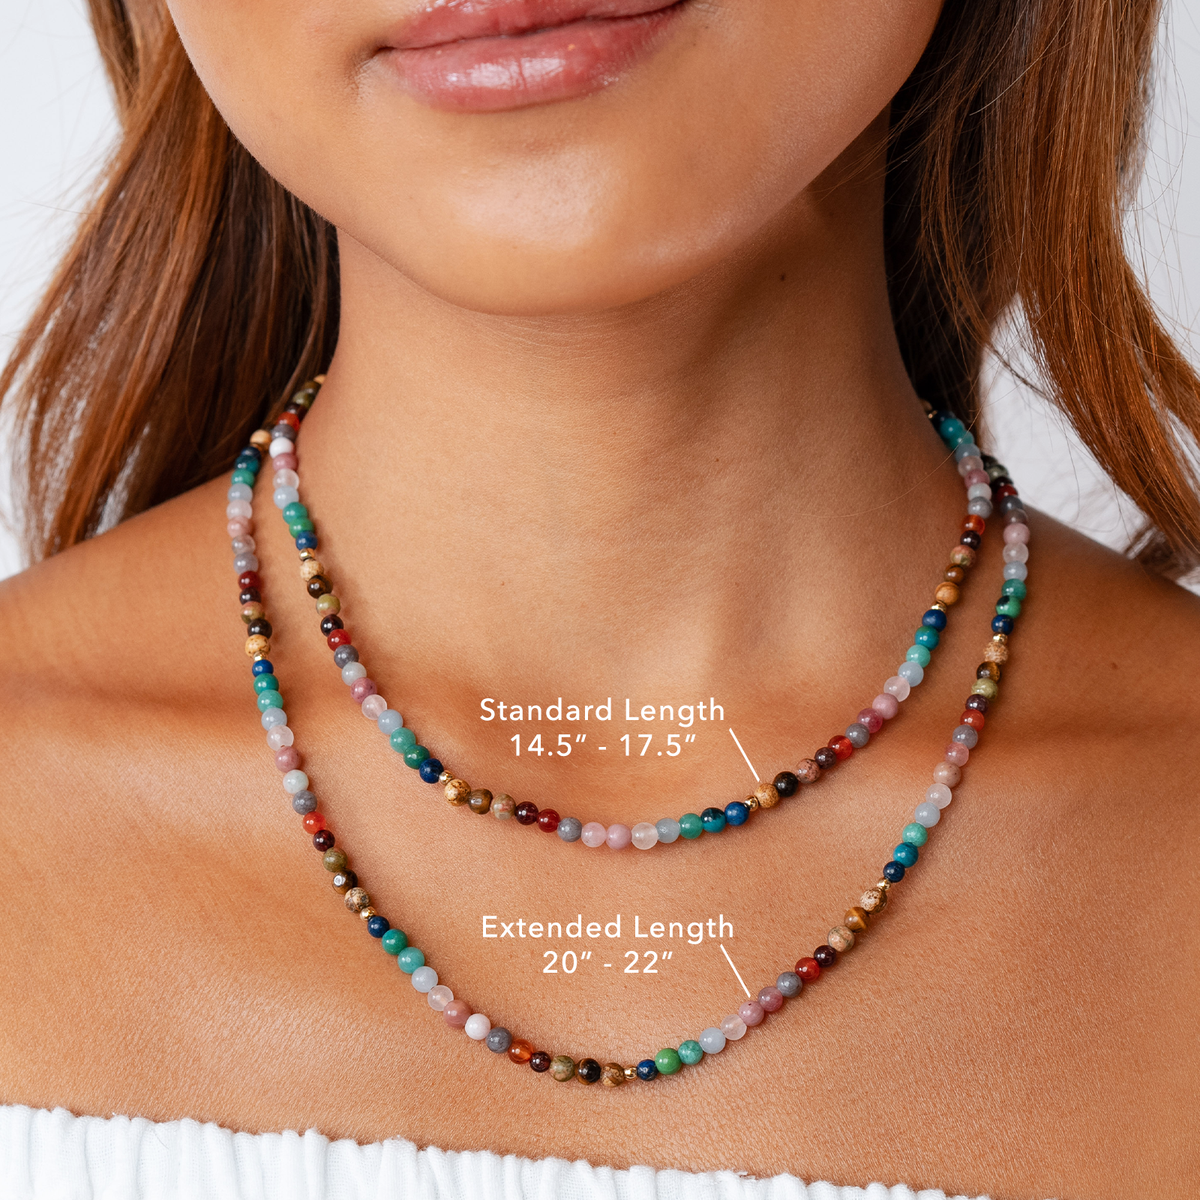 Model wearing a stack of two 4mm multicolor stone healing necklaces. The pictures showcases the standard length which is 14.5&quot;-17.5&quot; and the extended length which is 20&quot; to 22&quot;.